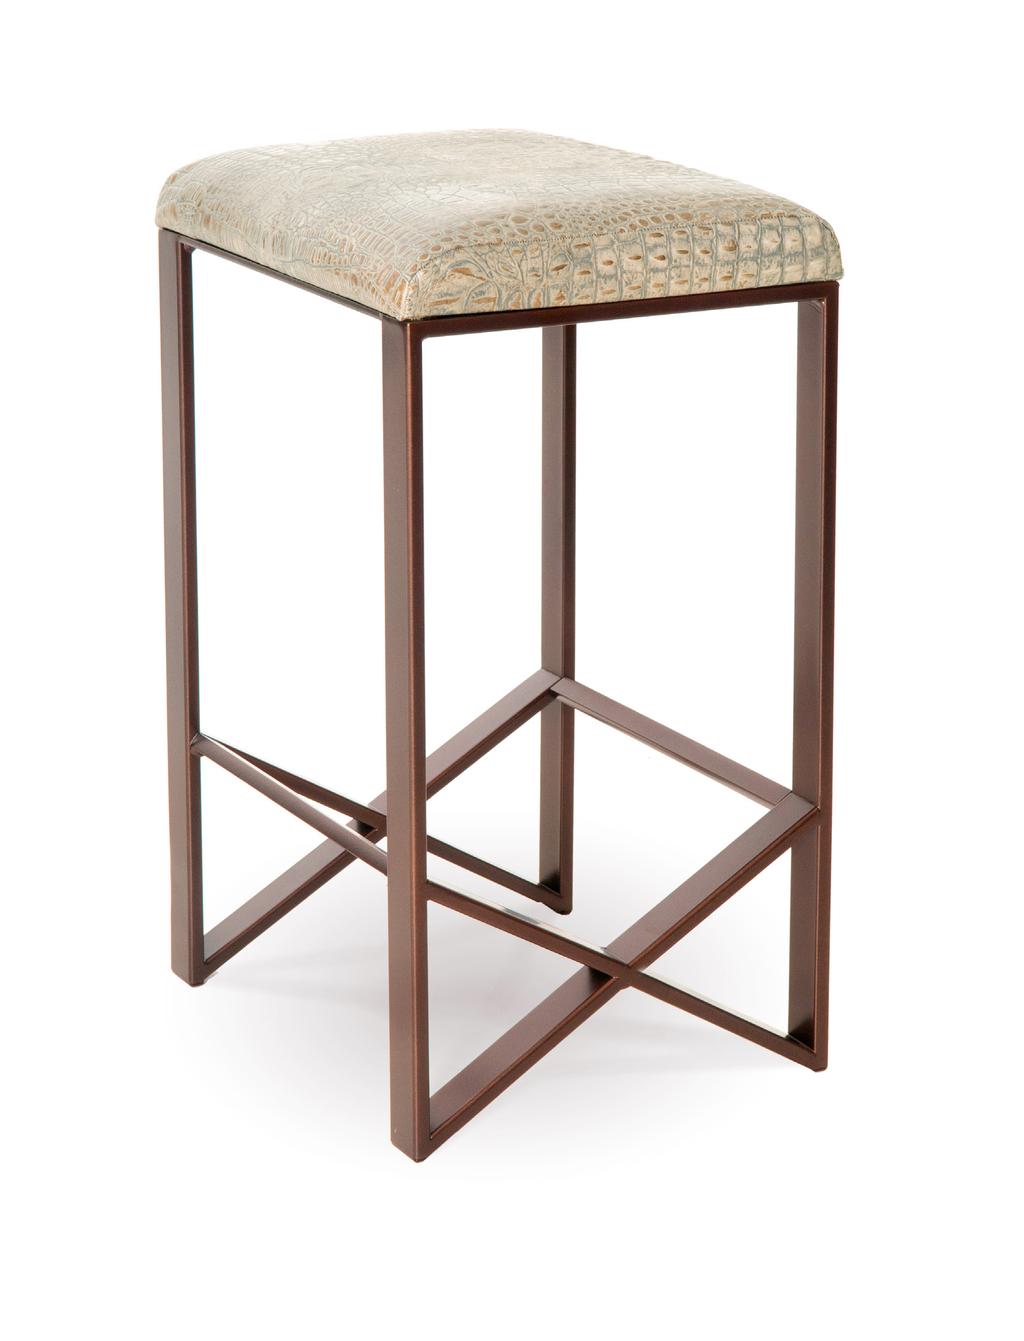 C956 Victoria Counterstool Shown in Oil-Rubbed Bronze (78) with a Stone Gate Croc Leather